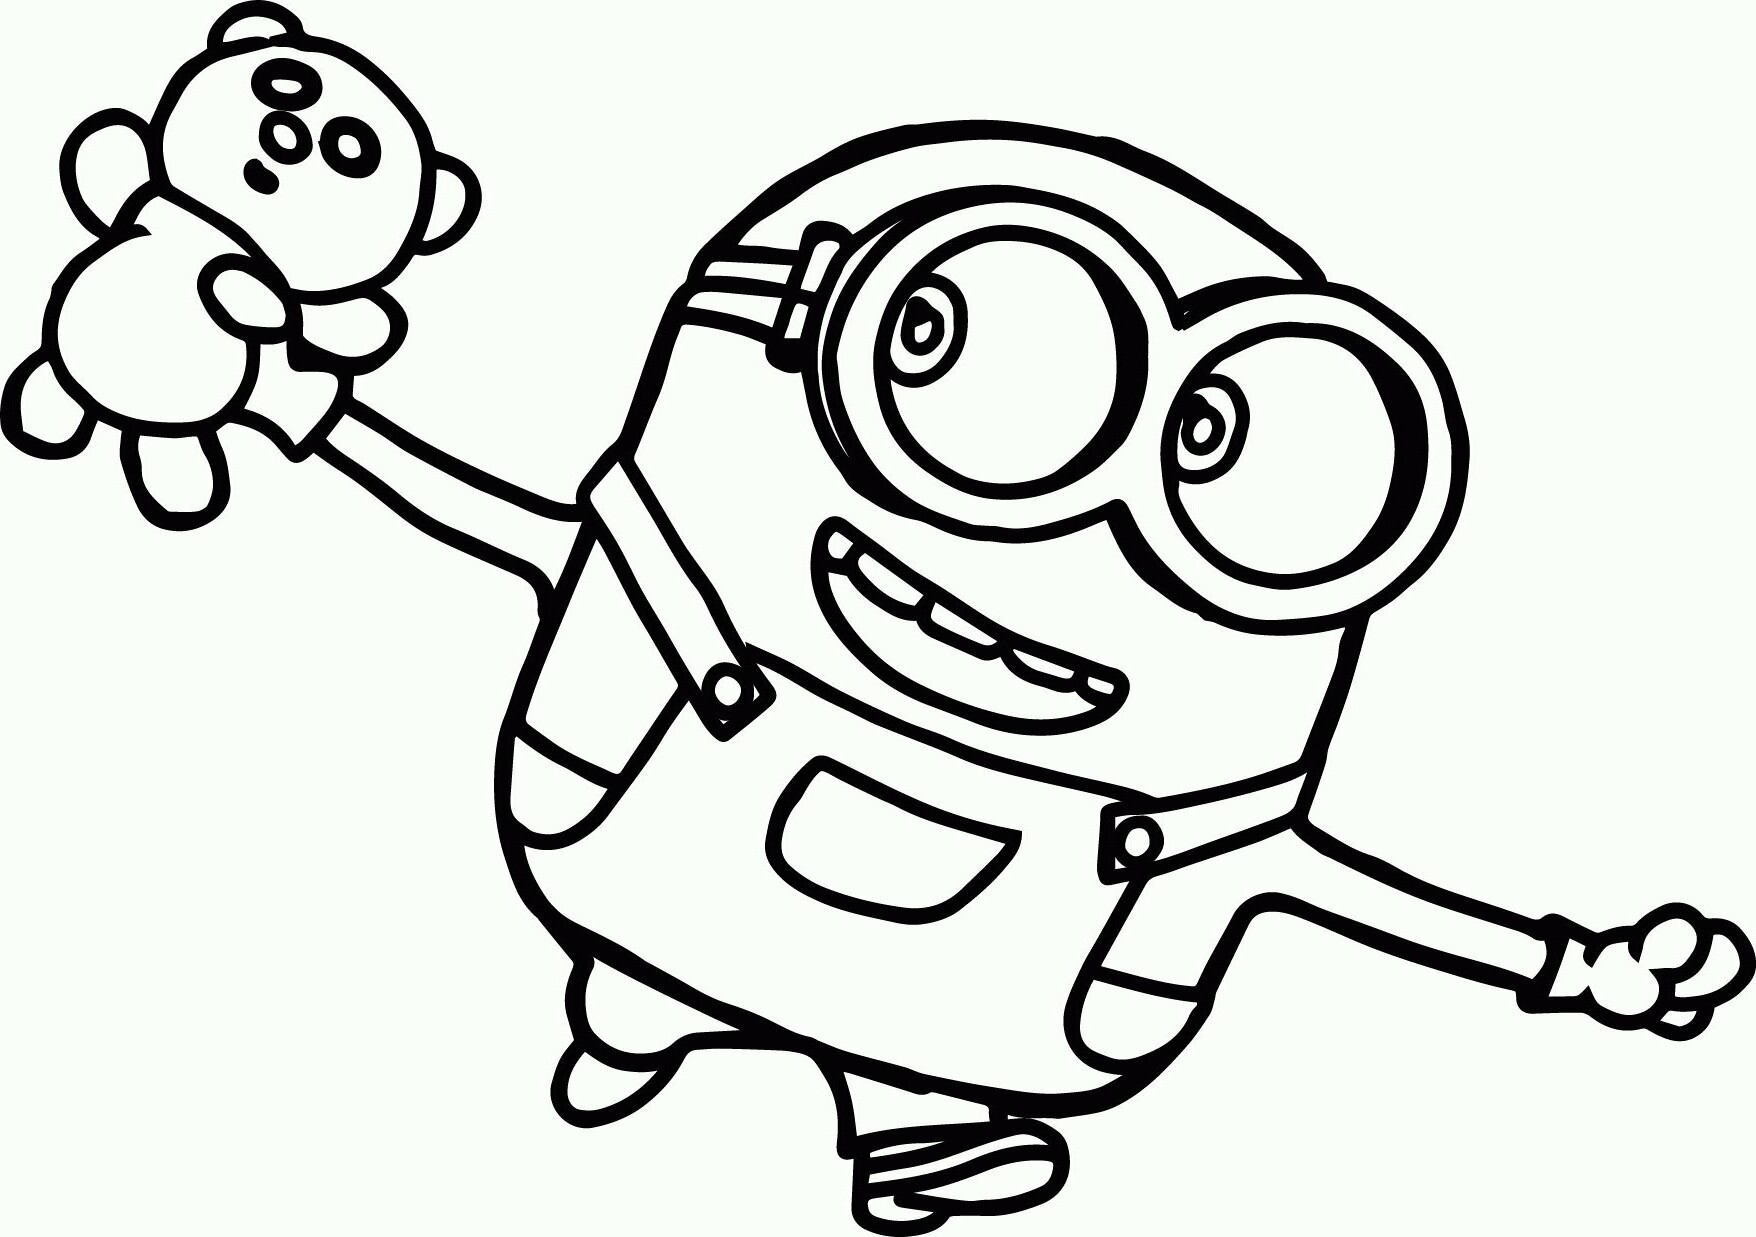 coloring-free-minion-coloring-pages-beautiful-minion-bob-with-teddy-coloring-page-free